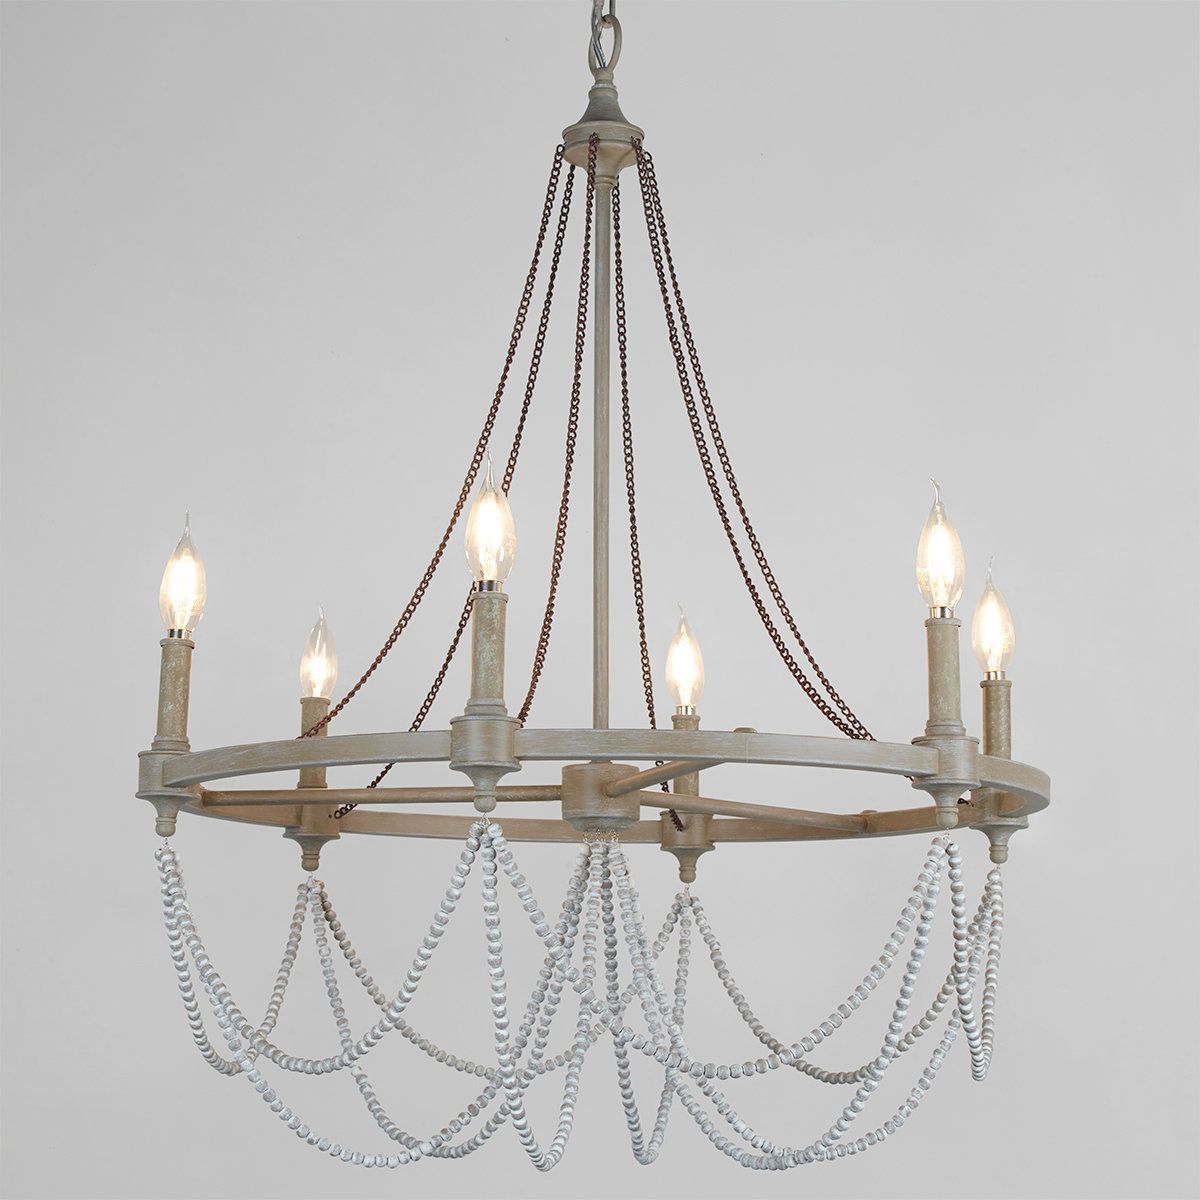 Shades Of Light – Harbor Haven 2018 – Elegant Rustic Drape In Best And Newest French Washed Oak And Distressed White Wood Six Light Chandeliers (View 2 of 20)